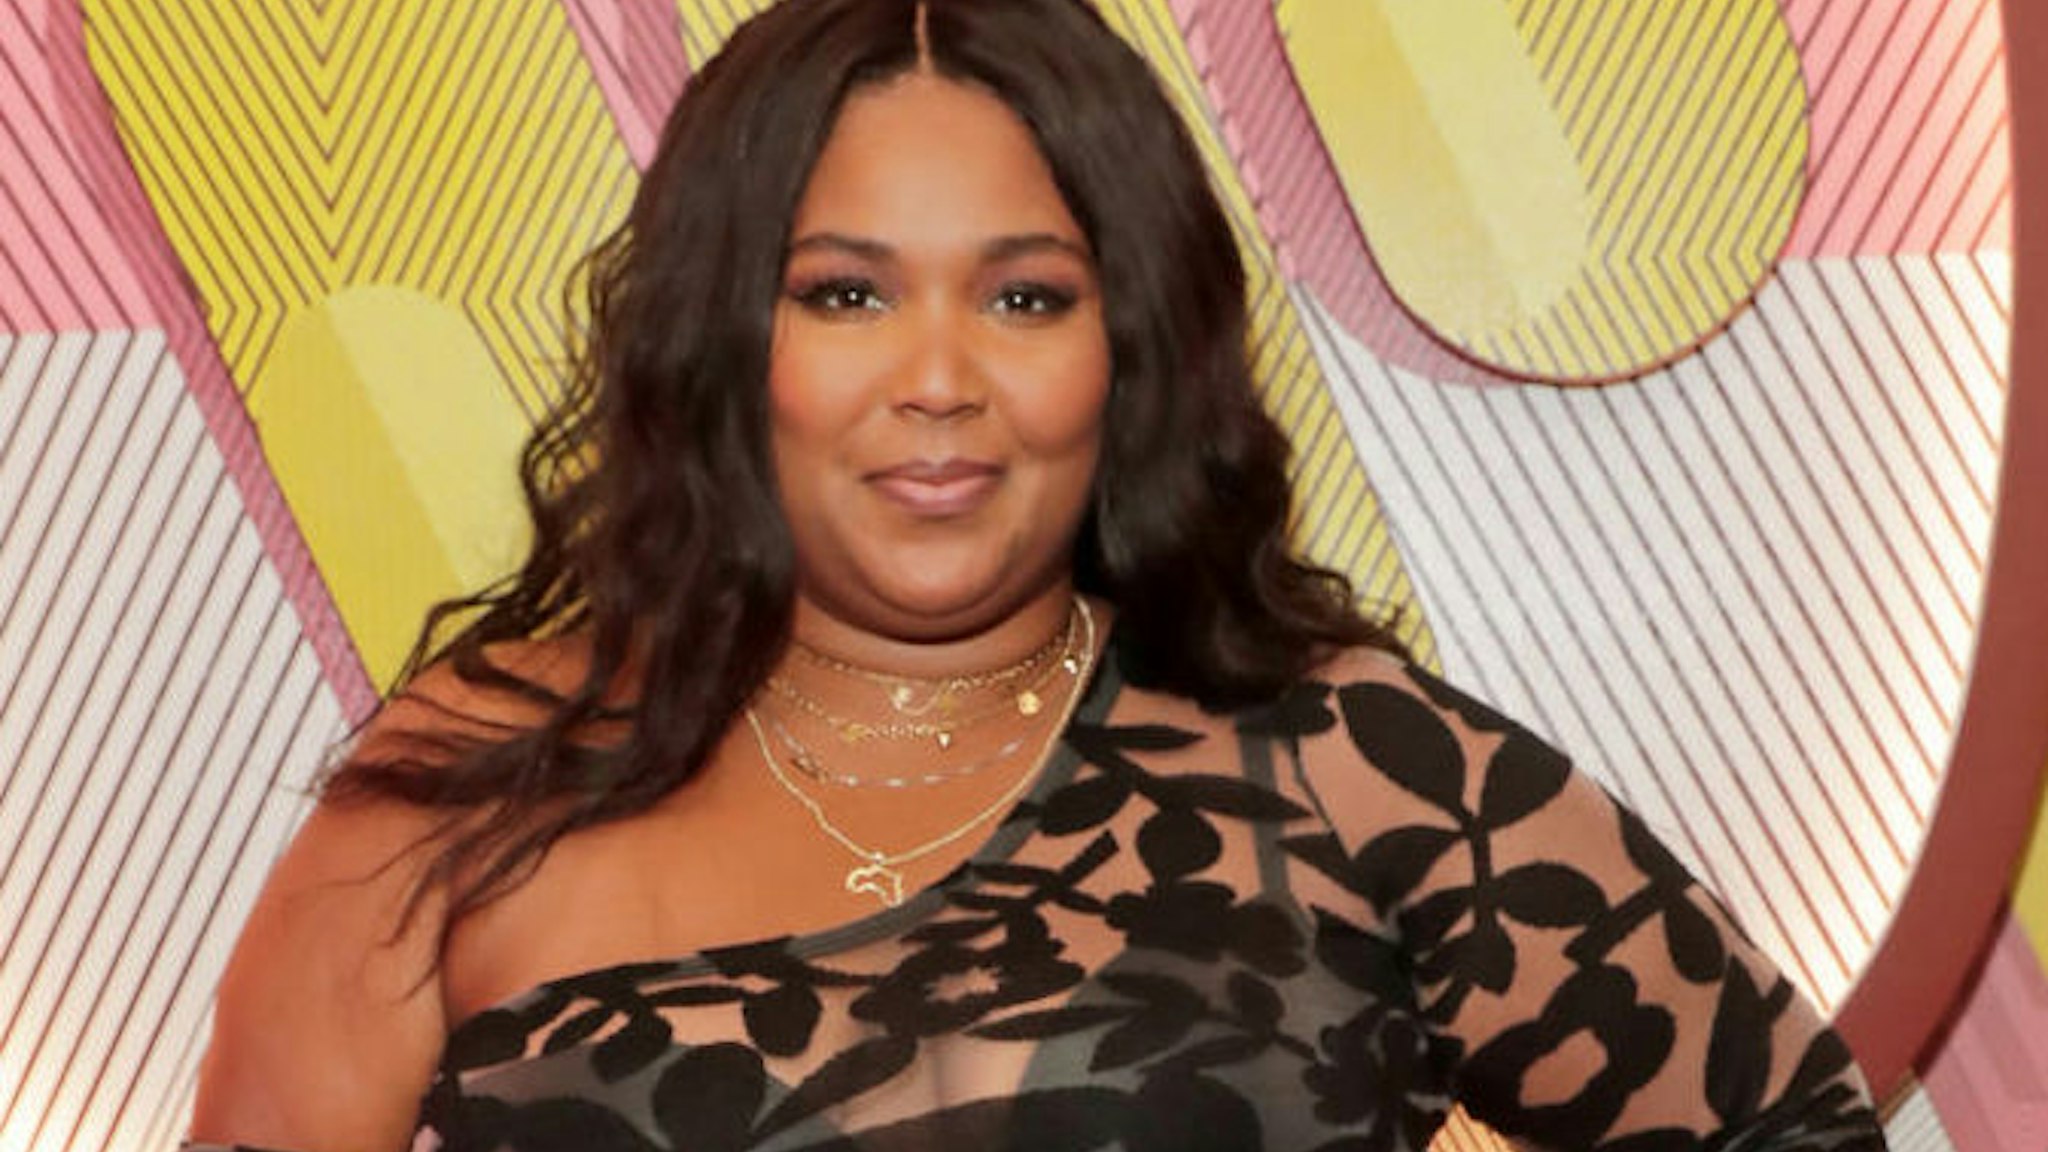 Lizzo attends the Warner Music & CIROC BRIT Awards house party, in association with GQ, at The Chiltern Firehouse on February 18, 2020 in London, England.